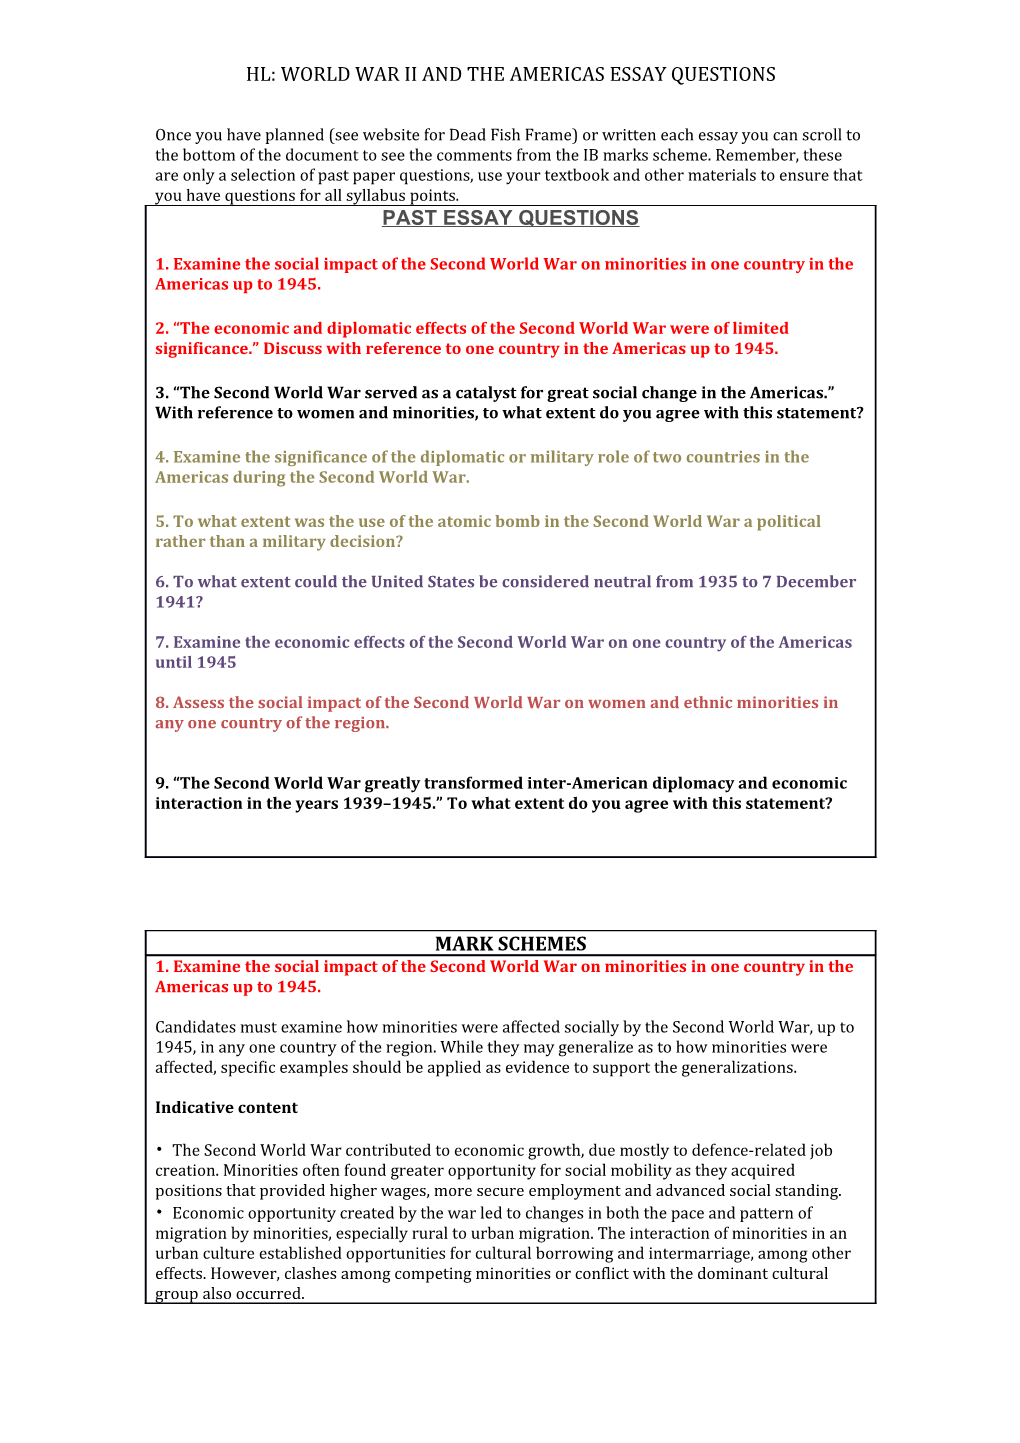 Hl: the Cold War and the Americas Essay Mark Schemes